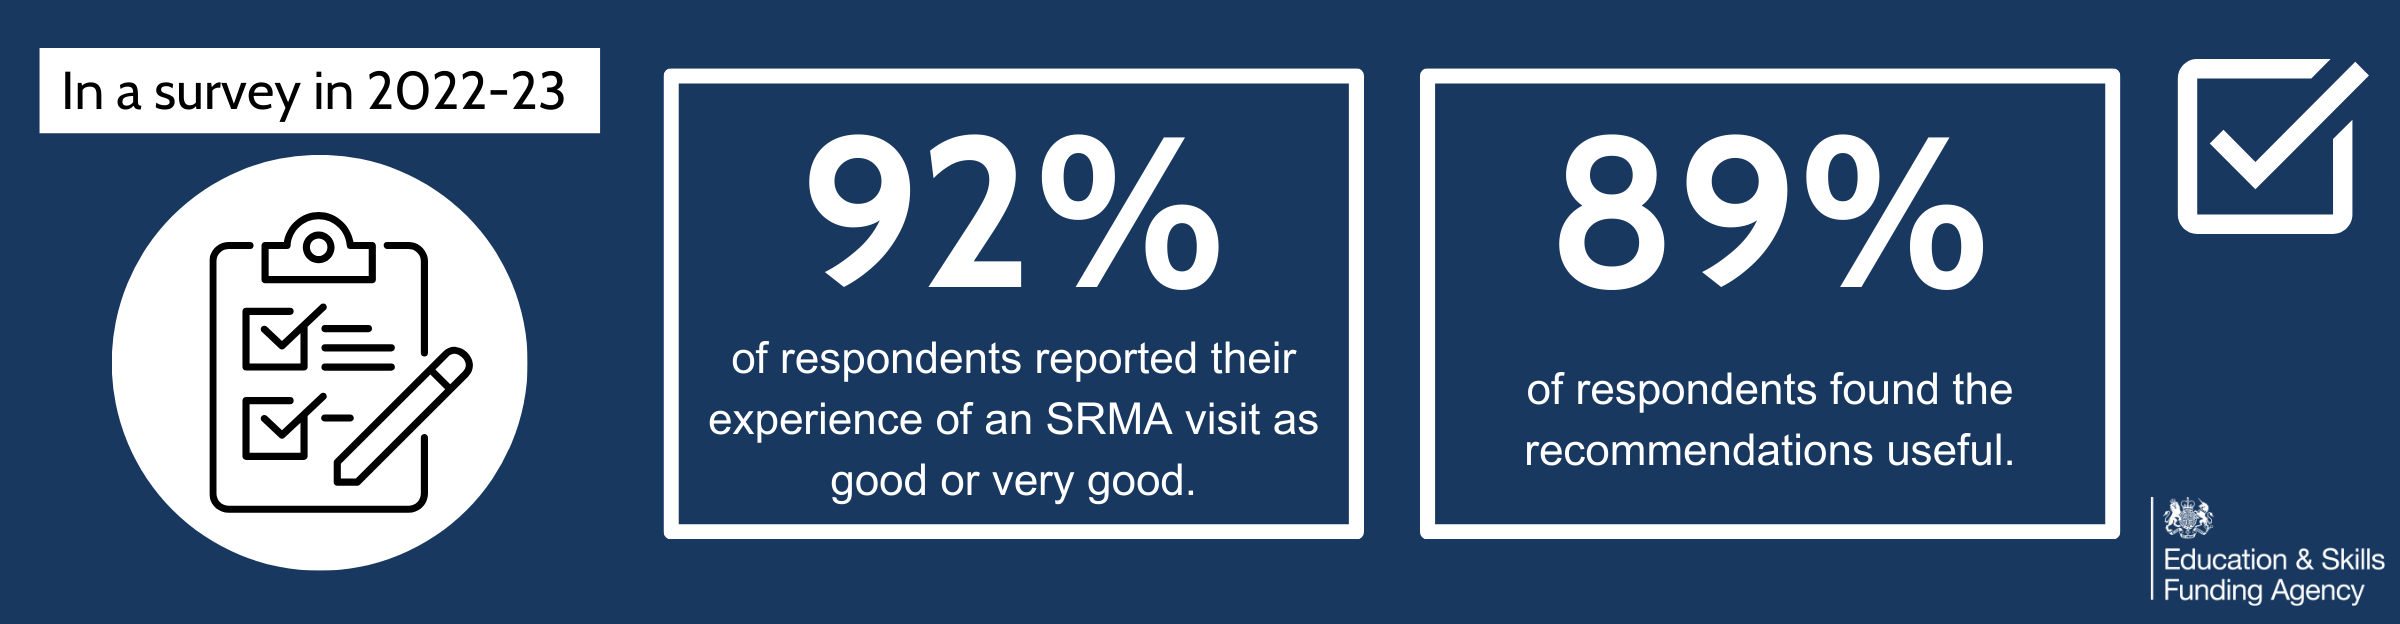 An infographic of SRMA statistics which states that 92% of respondents reported their experience of an SRMA visit as good or very good, and 89% of respondents found the recommendations useful.